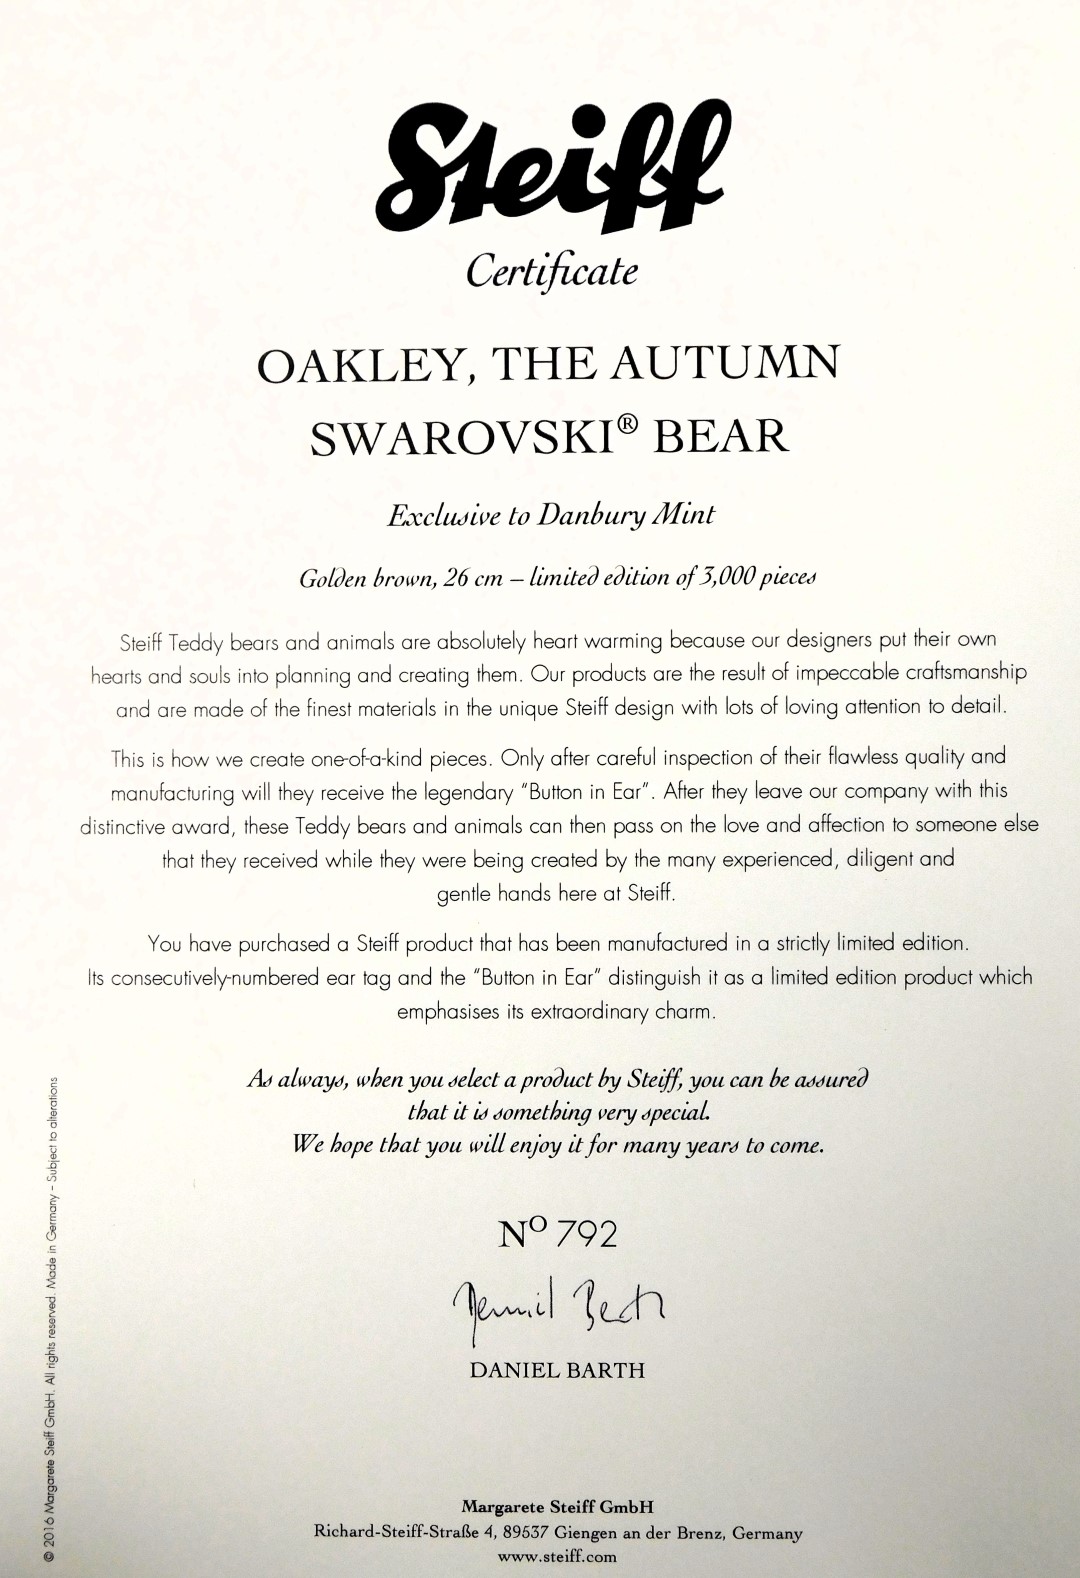 A Steiff Teddy Bu 1925, with certificate and Oakley the Autumn Swarovski bear, exclusive to Danbury - Image 2 of 5